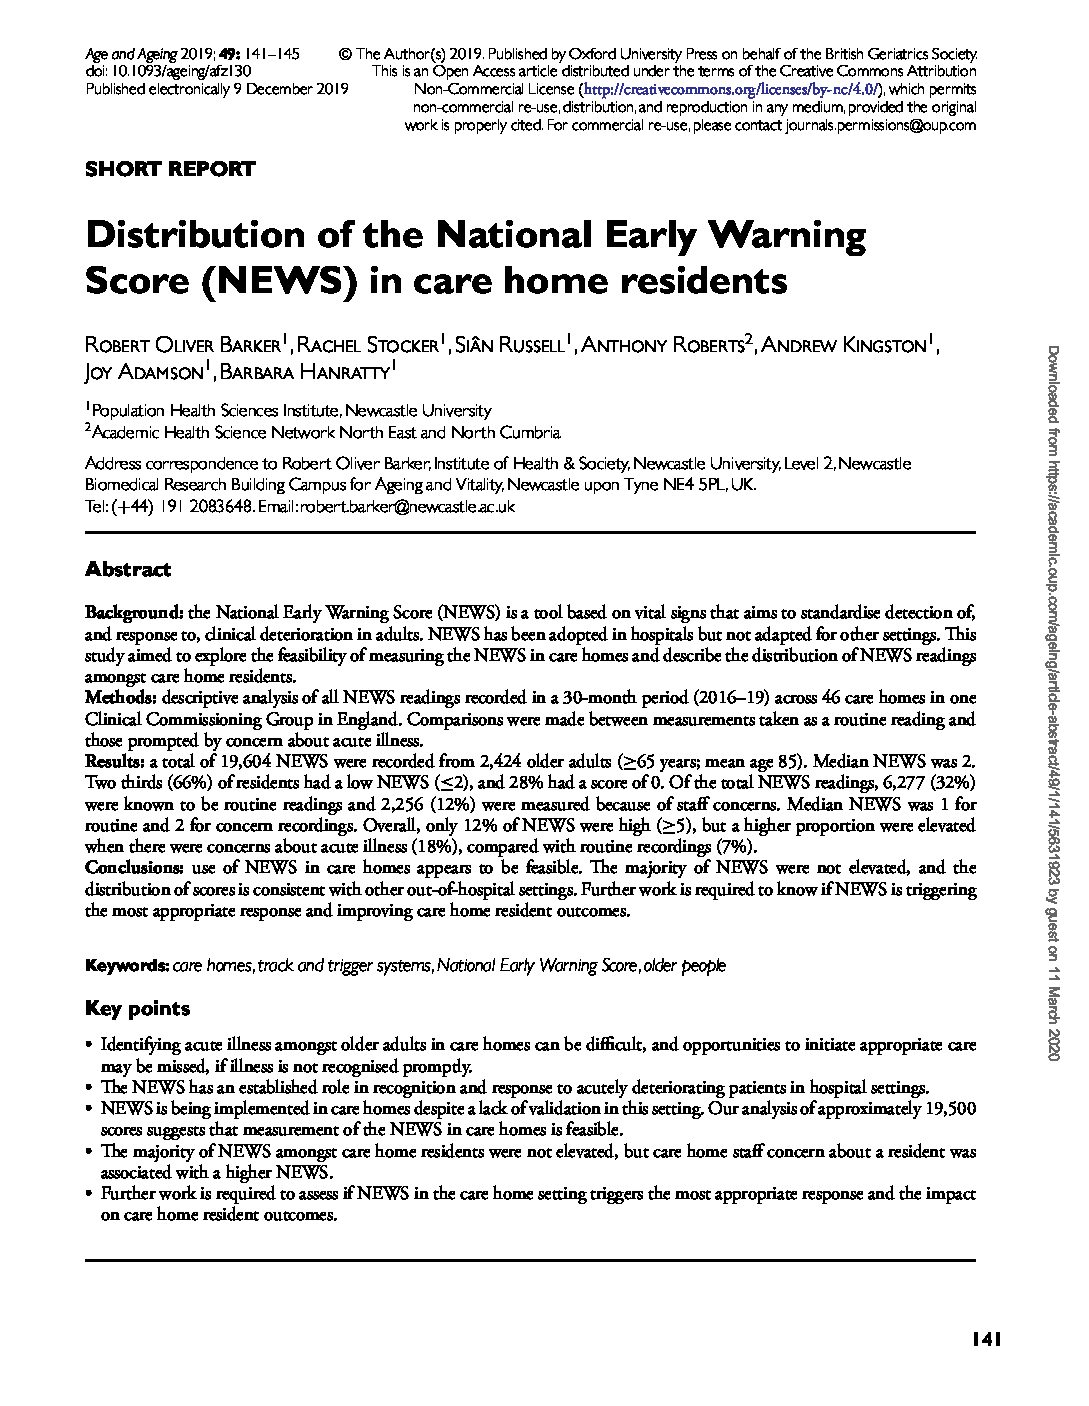 Distribution of the National Early Warning Scores (NEWS) in care home residents